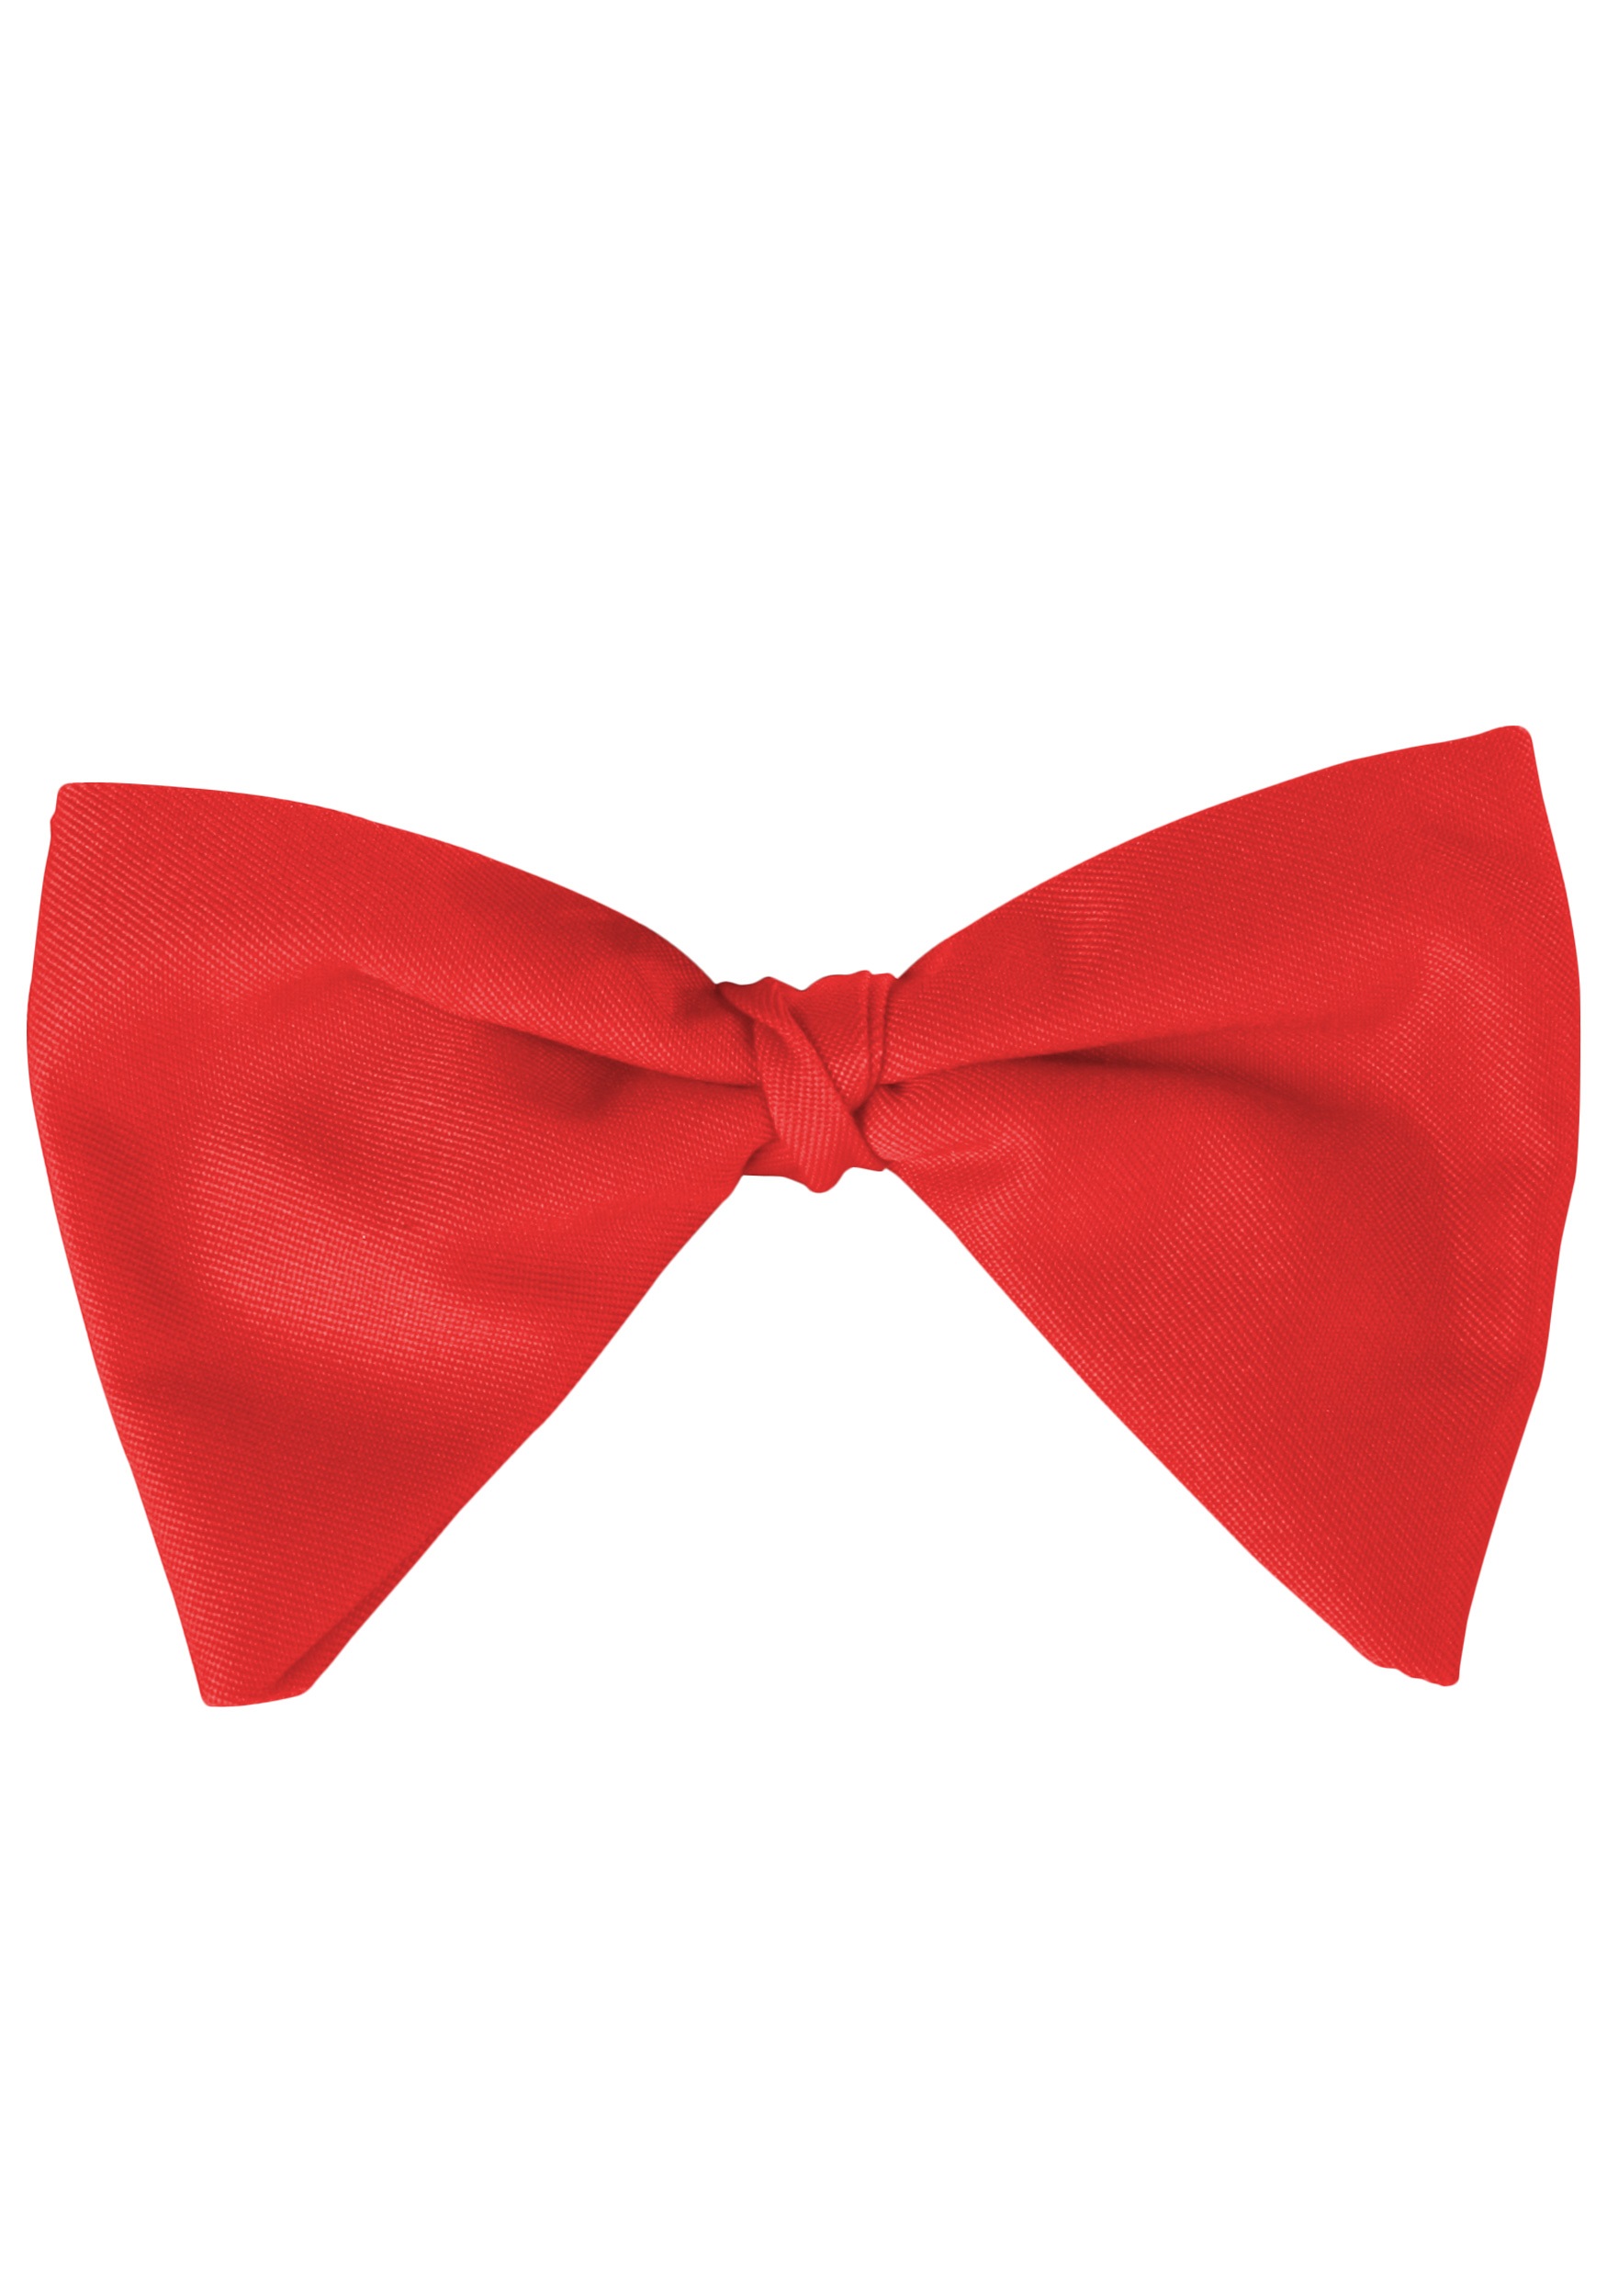 Best Photos of Red Cartoon Bow Ties - Red Bow Tie Clip Art, Red ... -  ClipArt Best - ClipArt Best